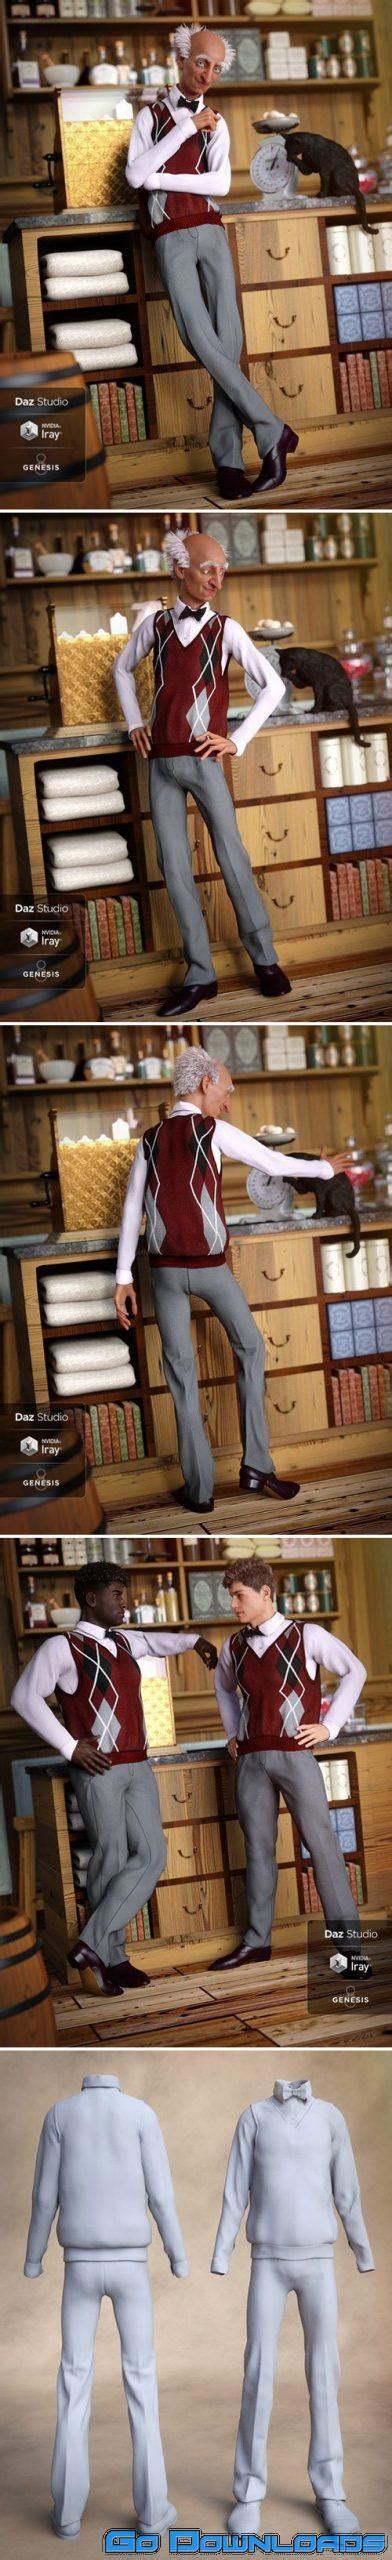 Daz3d Sweater Vest Outfit For Genesis 8 Male S 000157 Free Download